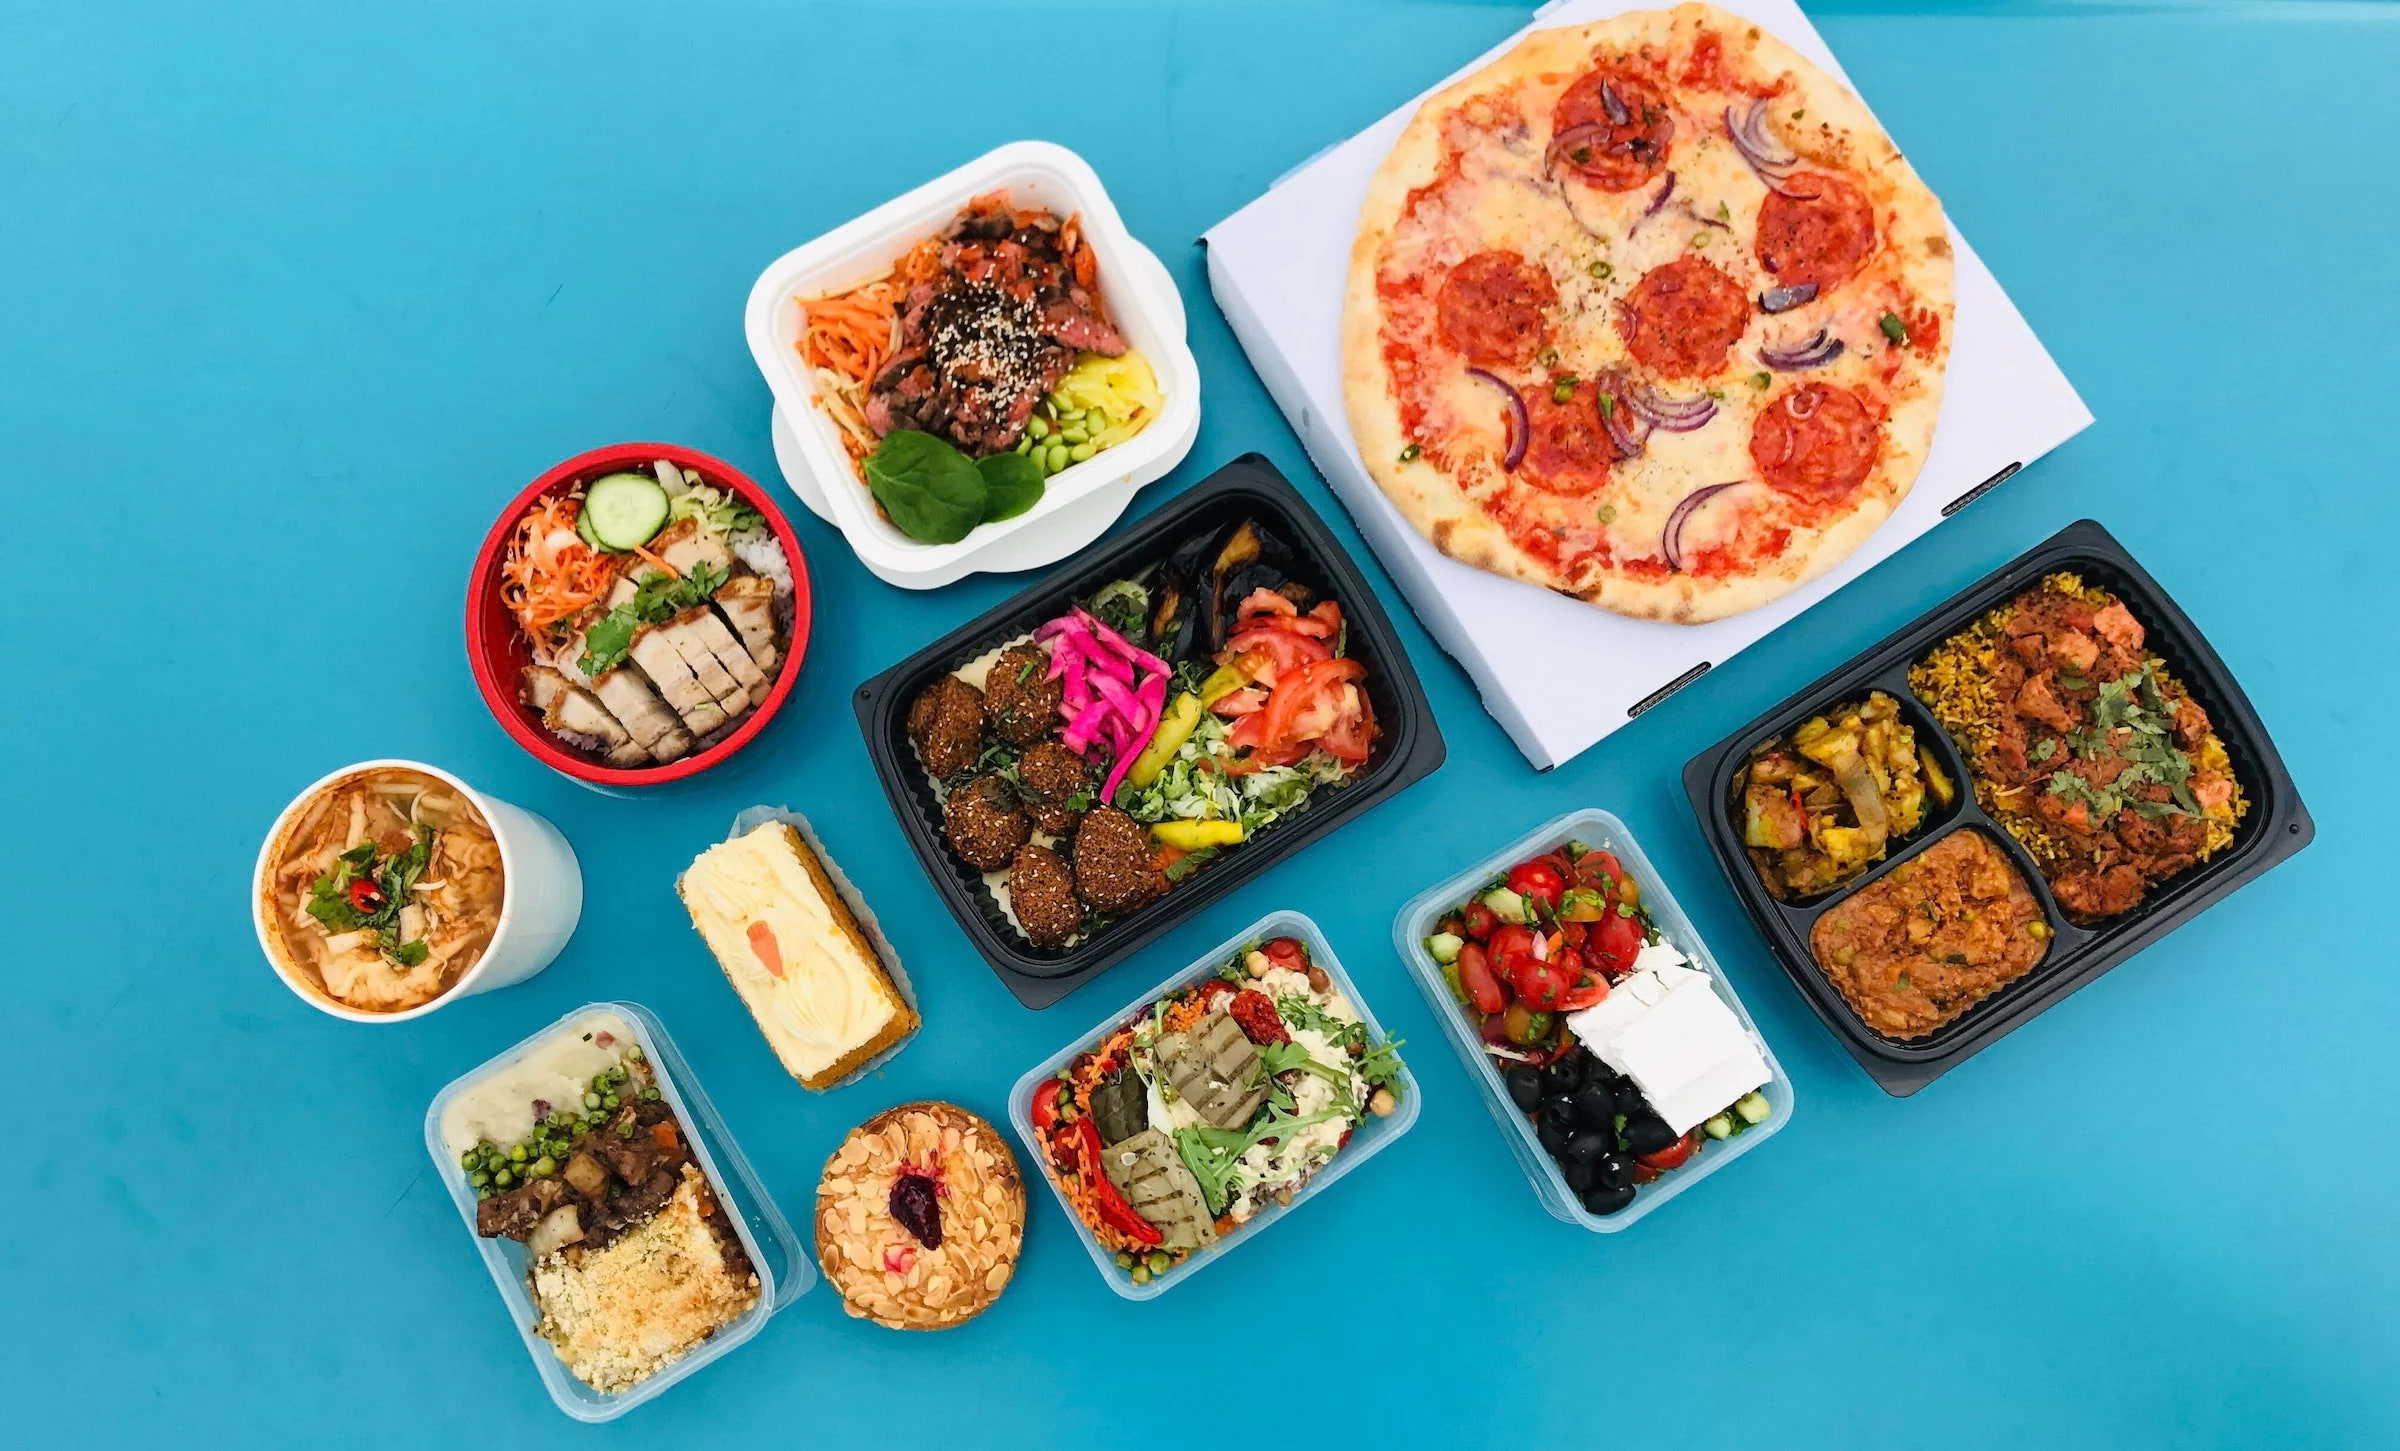 A variety of takeaway meals